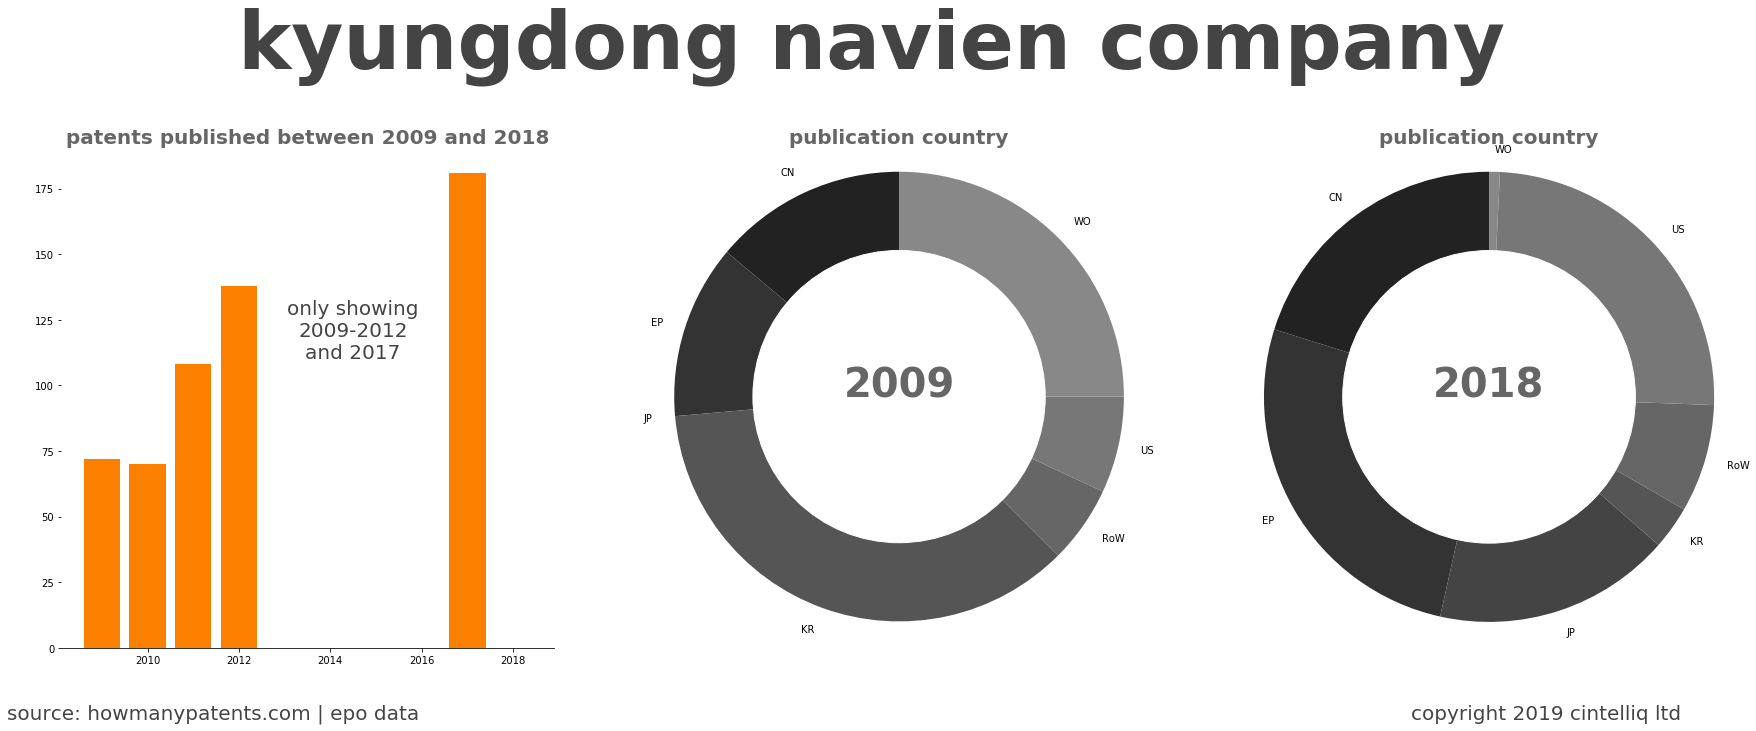 summary of patents for Kyungdong Navien Company